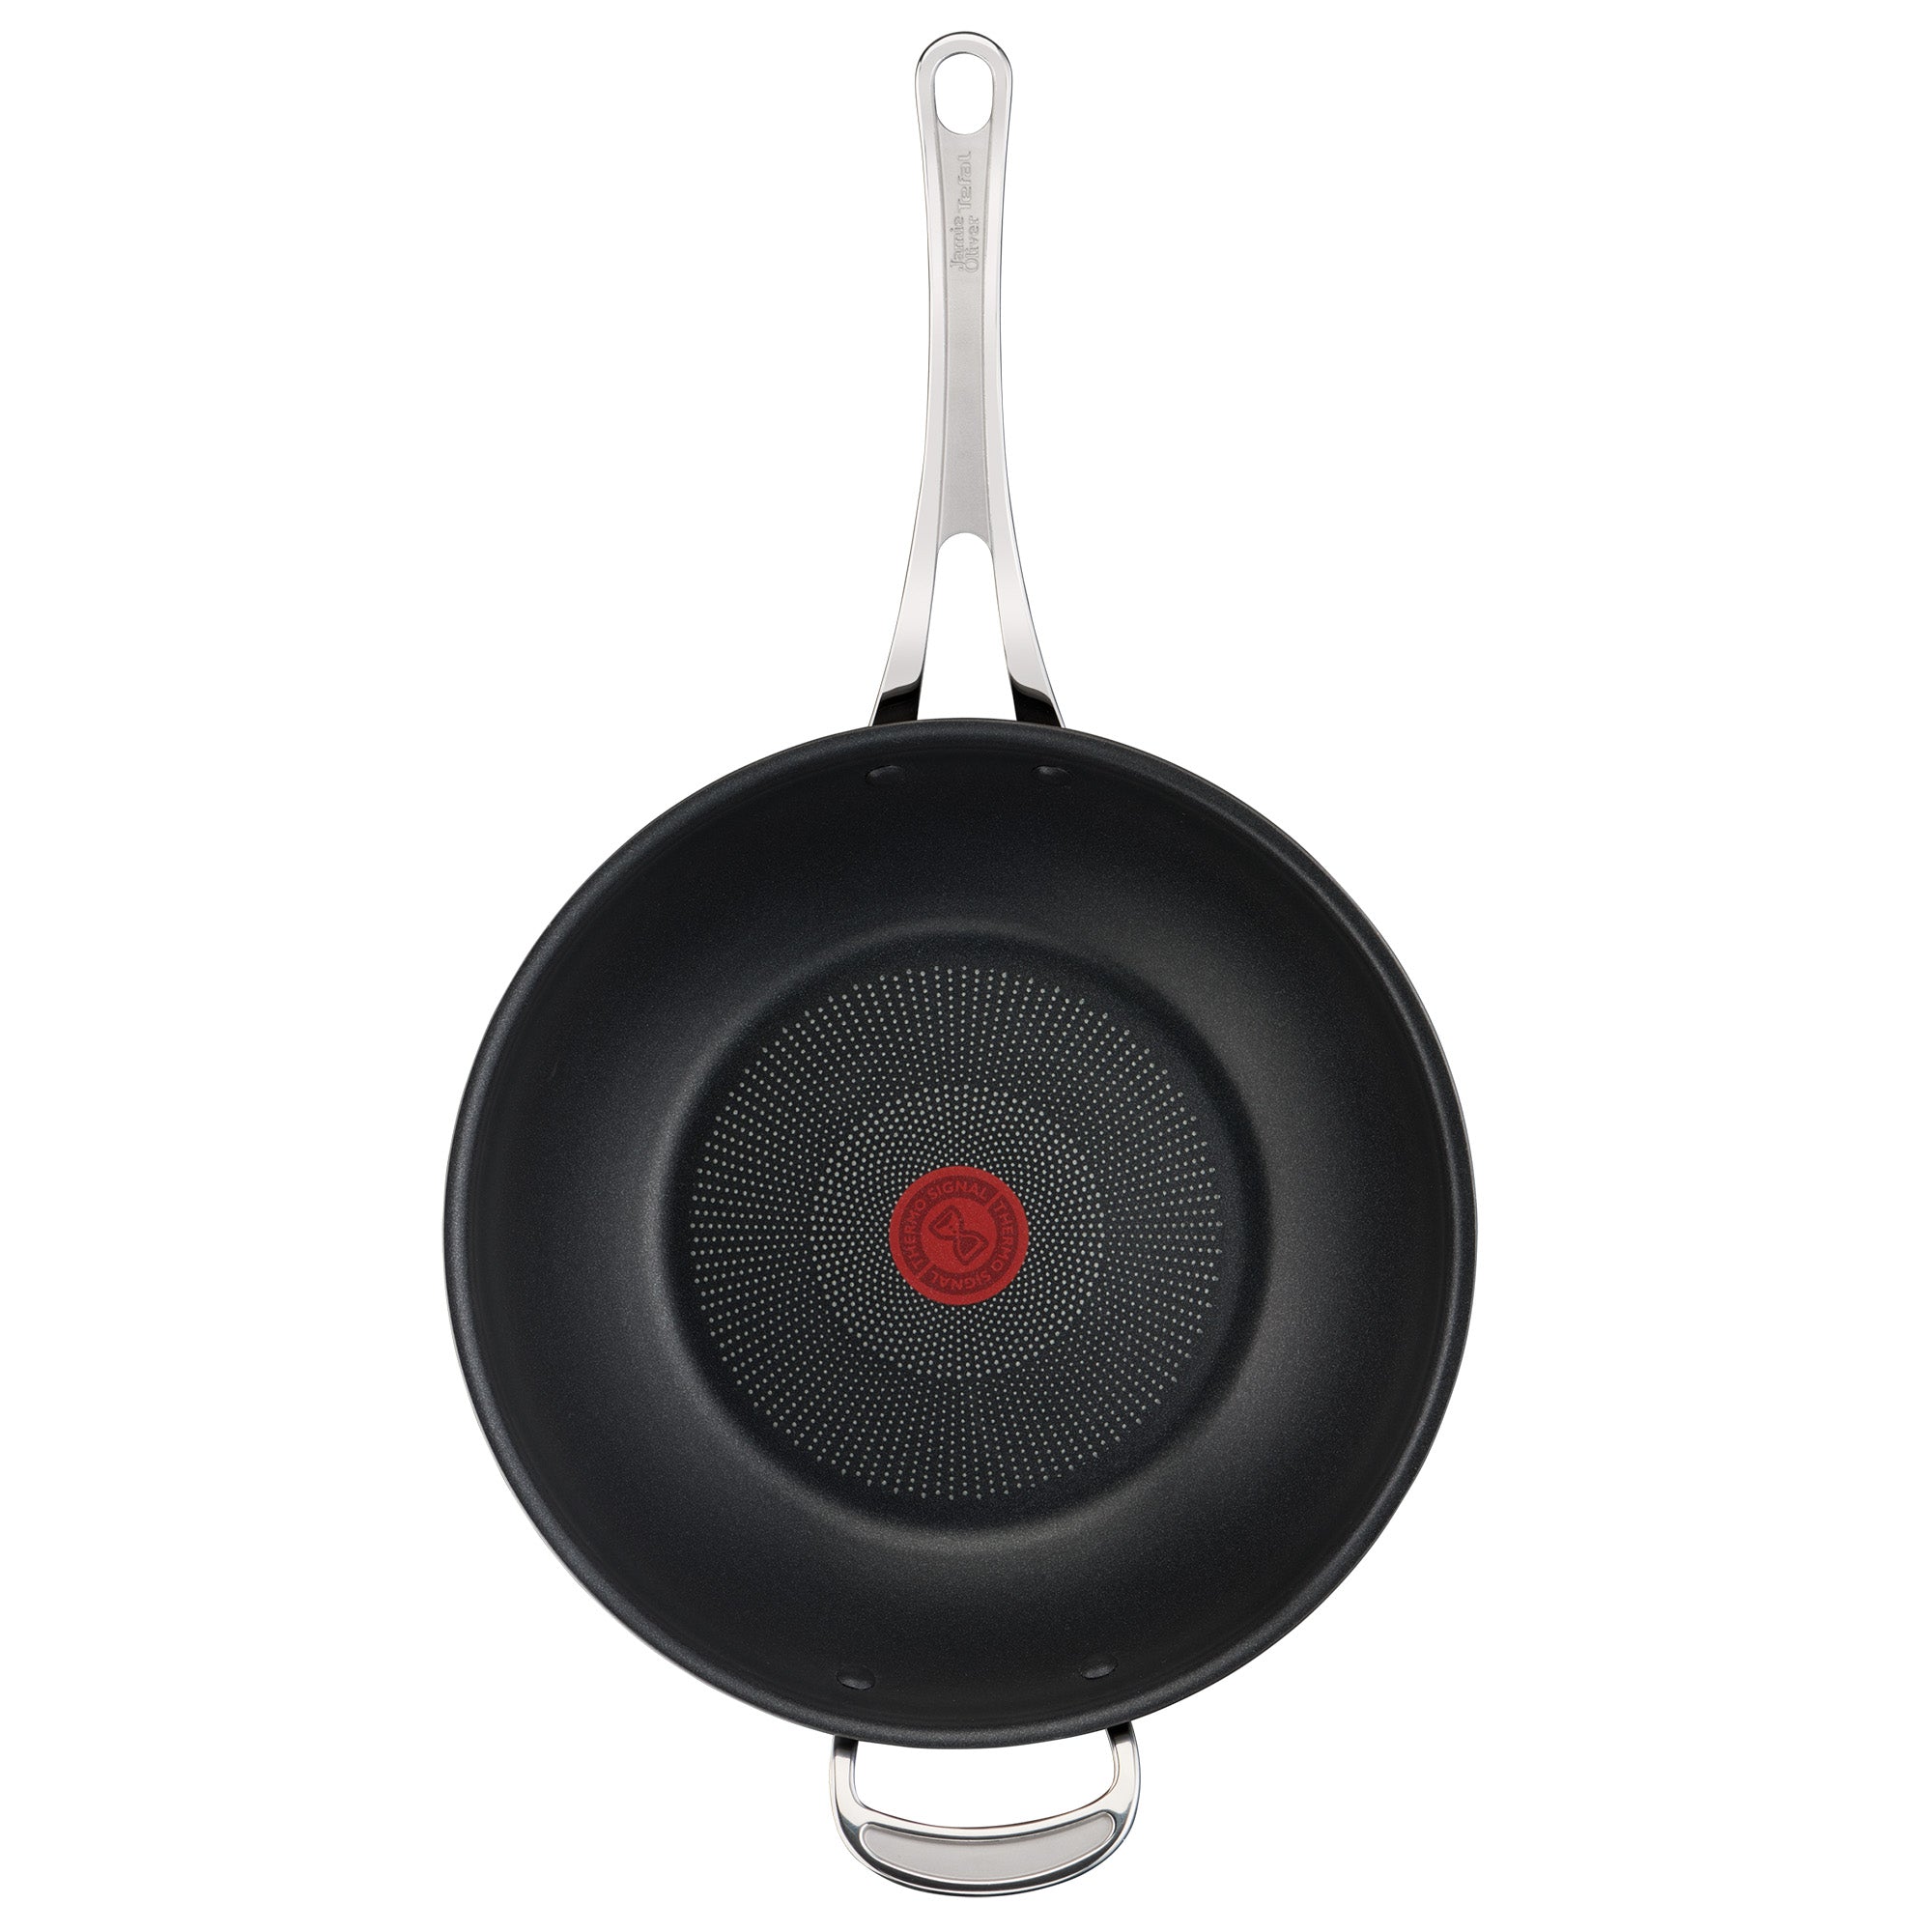 Jamie Oliver by Tefal Cooks Classic Non-Stick Induction Hard Anodised Wok 30cm